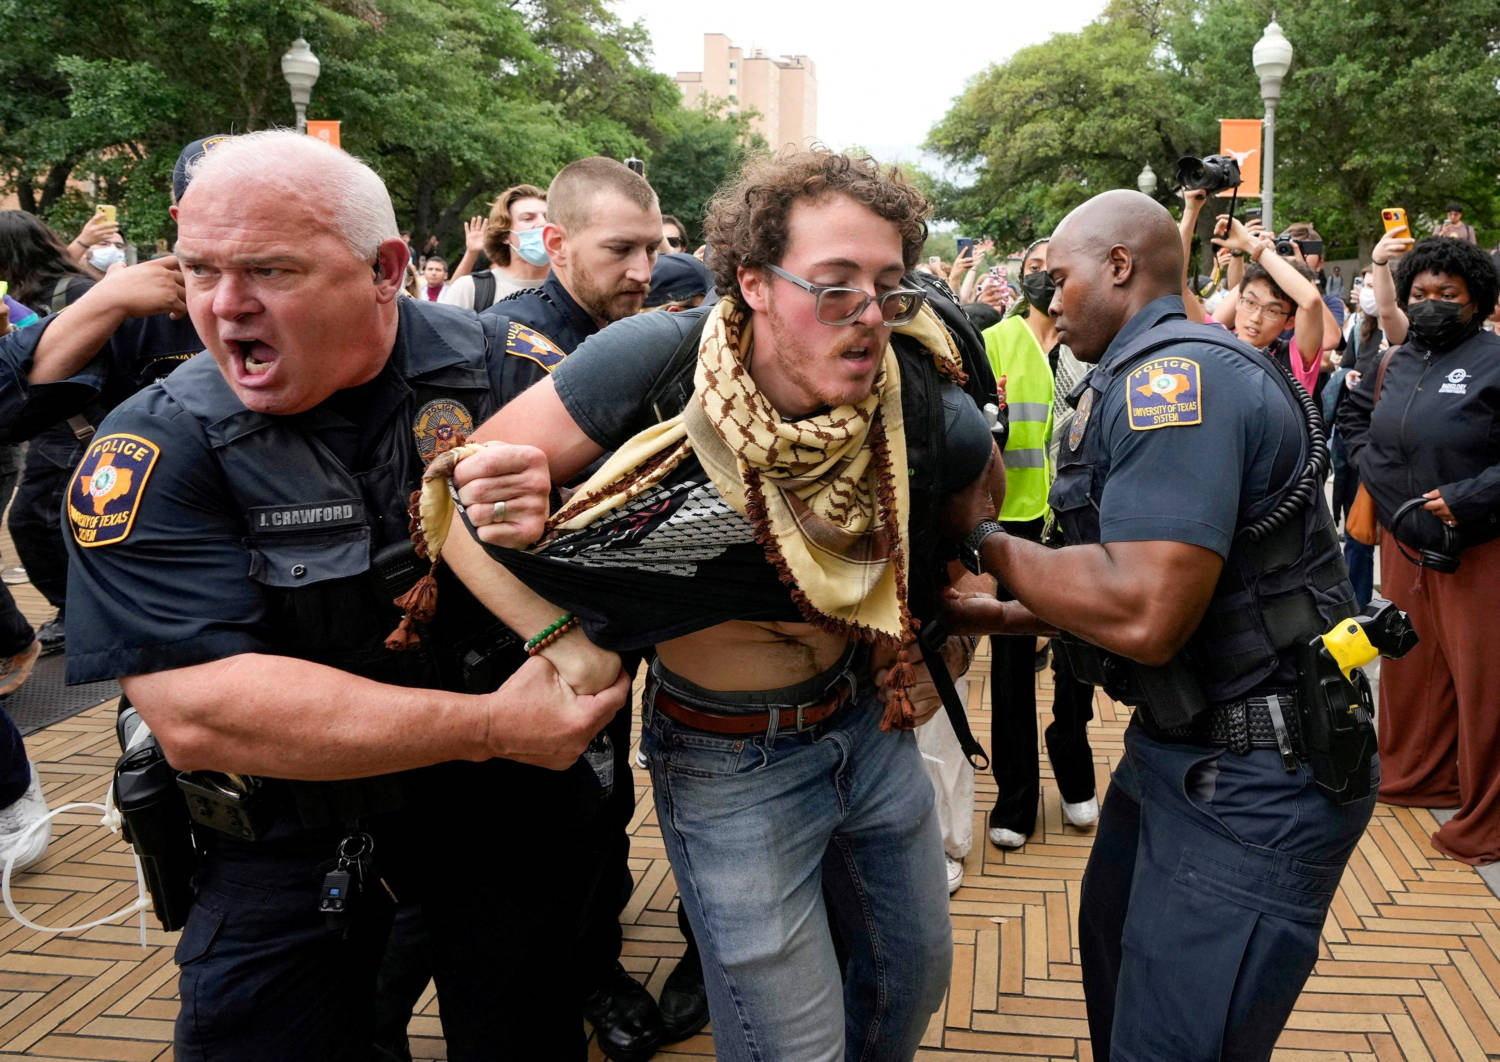 University Of Texas Police Detain A Man At A Pro Palestinian Protest At The University Of Texas